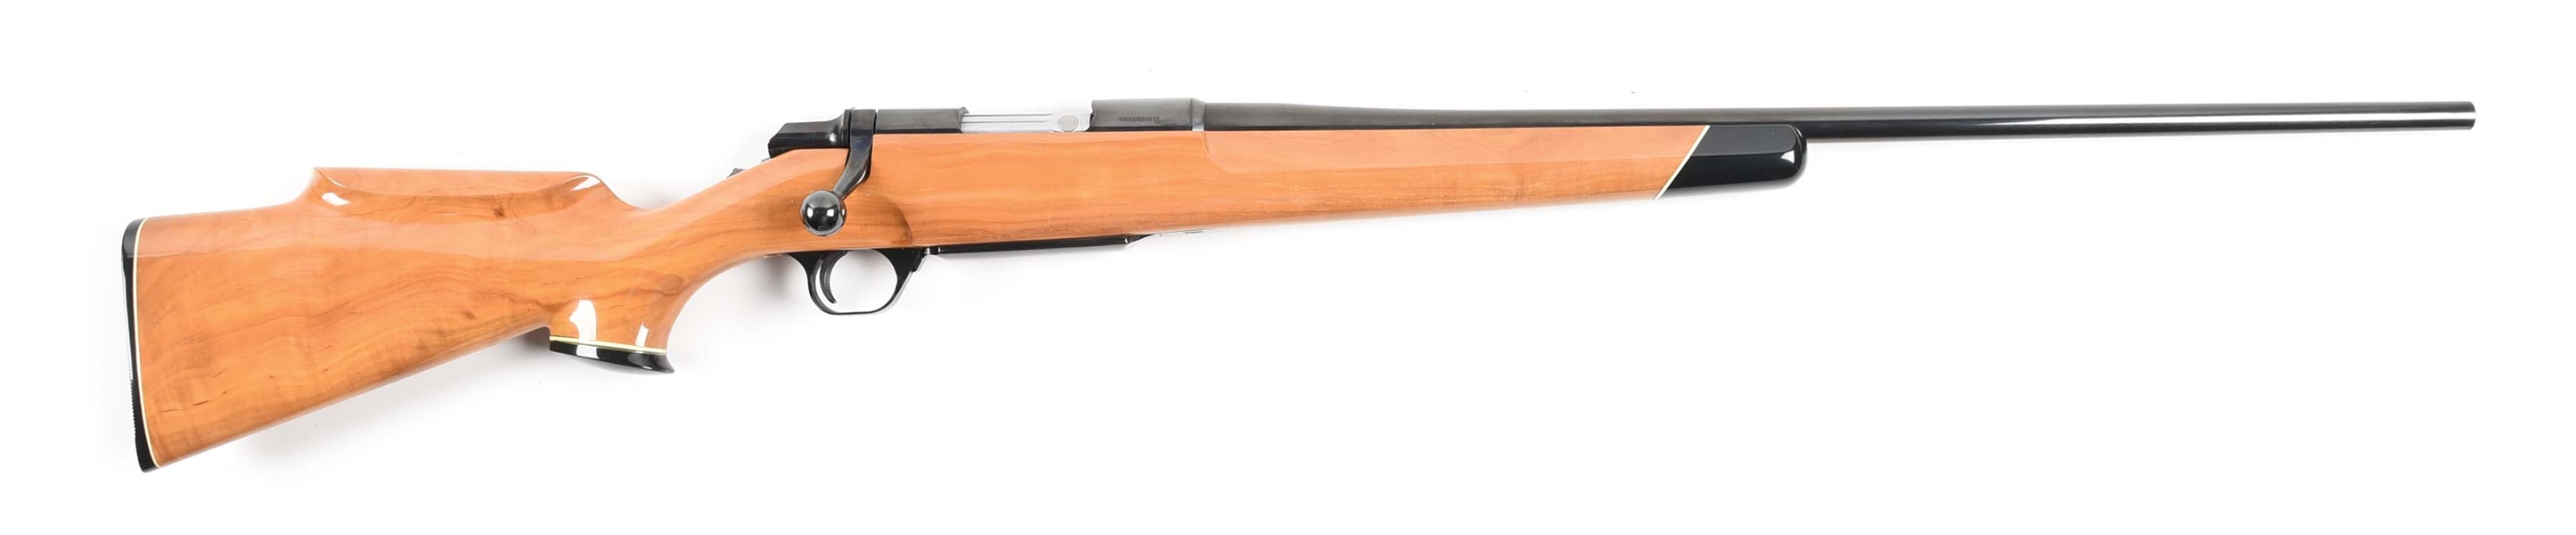 (M) BROWNING BBR BOLT ACTION RIFLE WITH APPLE STOCK.